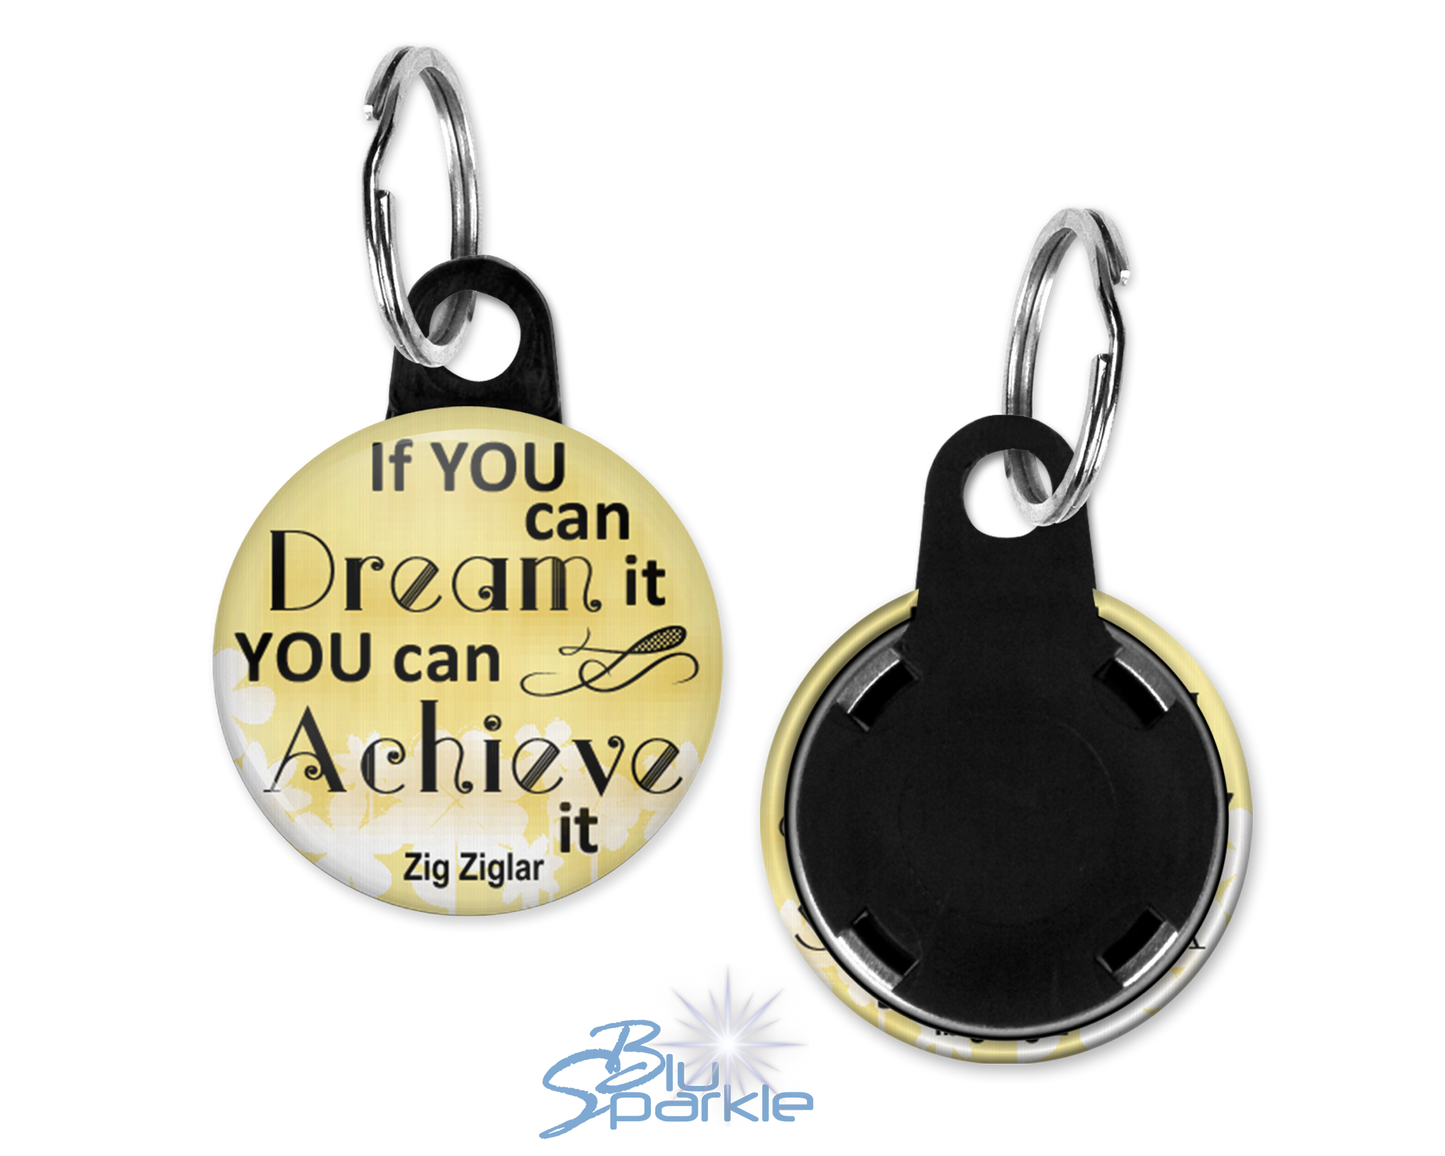 If You Can Dream It You Can Achieve It - Key Chains